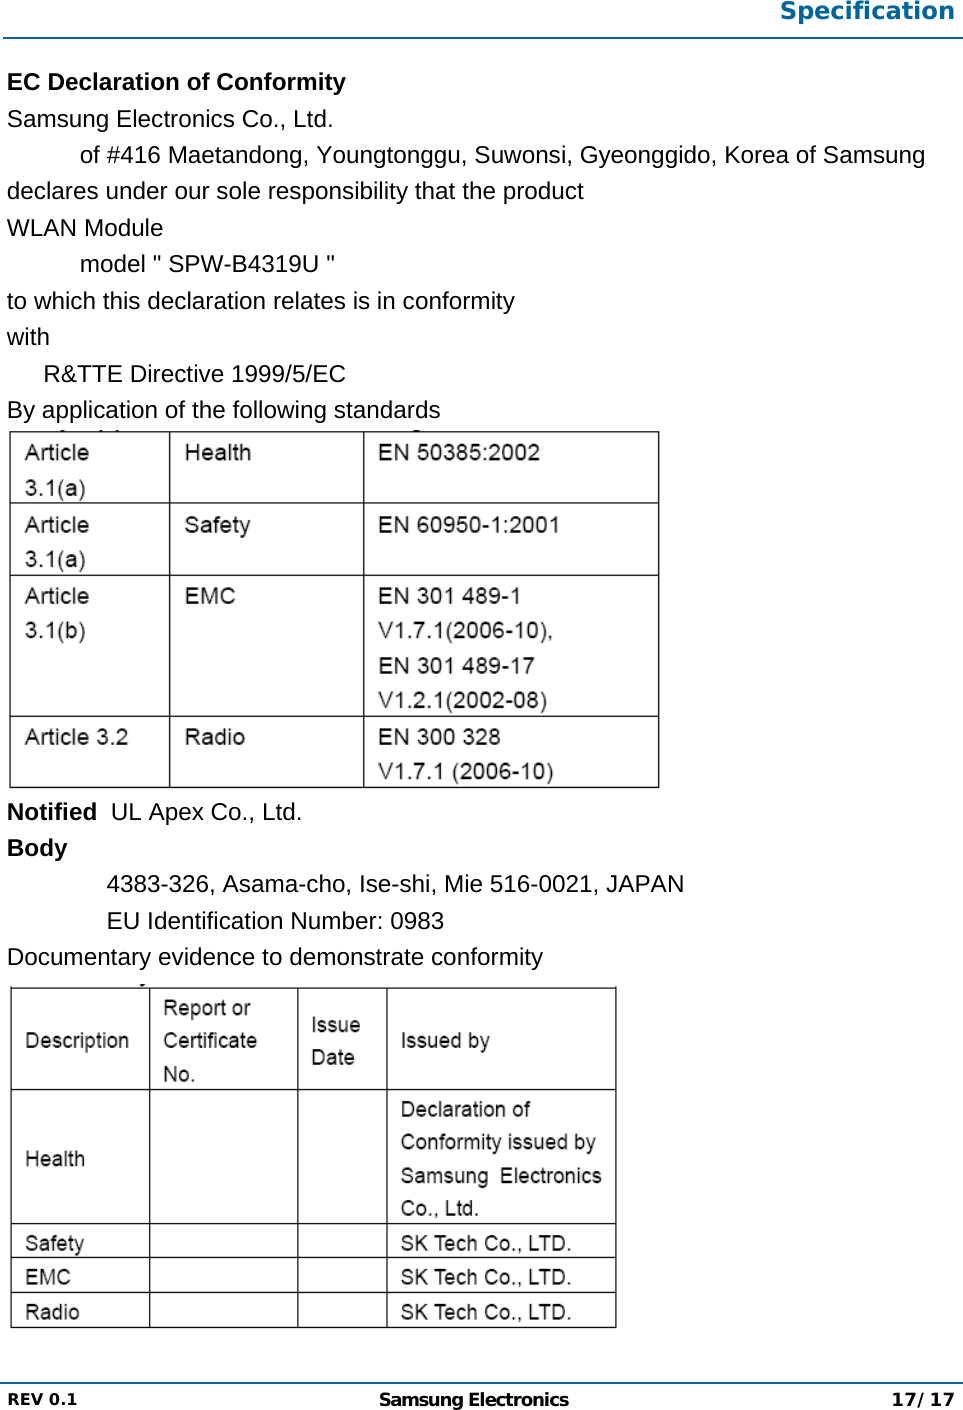  Specification  REV 0.1  Samsung Electronics 17/17  EC Declaration of Conformity Samsung Electronics Co., Ltd. of #416 Maetandong, Youngtonggu, Suwonsi, Gyeonggido, Korea of Samsung  declares under our sole responsibility that the product WLAN Module model &quot; SPW-B4319U &quot; to which this declaration relates is in conformity with R&amp;TTE Directive 1999/5/EC By application of the following standards  Notified  UL Apex Co., Ltd. Body 4383-326, Asama-cho, Ise-shi, Mie 516-0021, JAPAN EU Identification Number: 0983 Documentary evidence to demonstrate conformity  